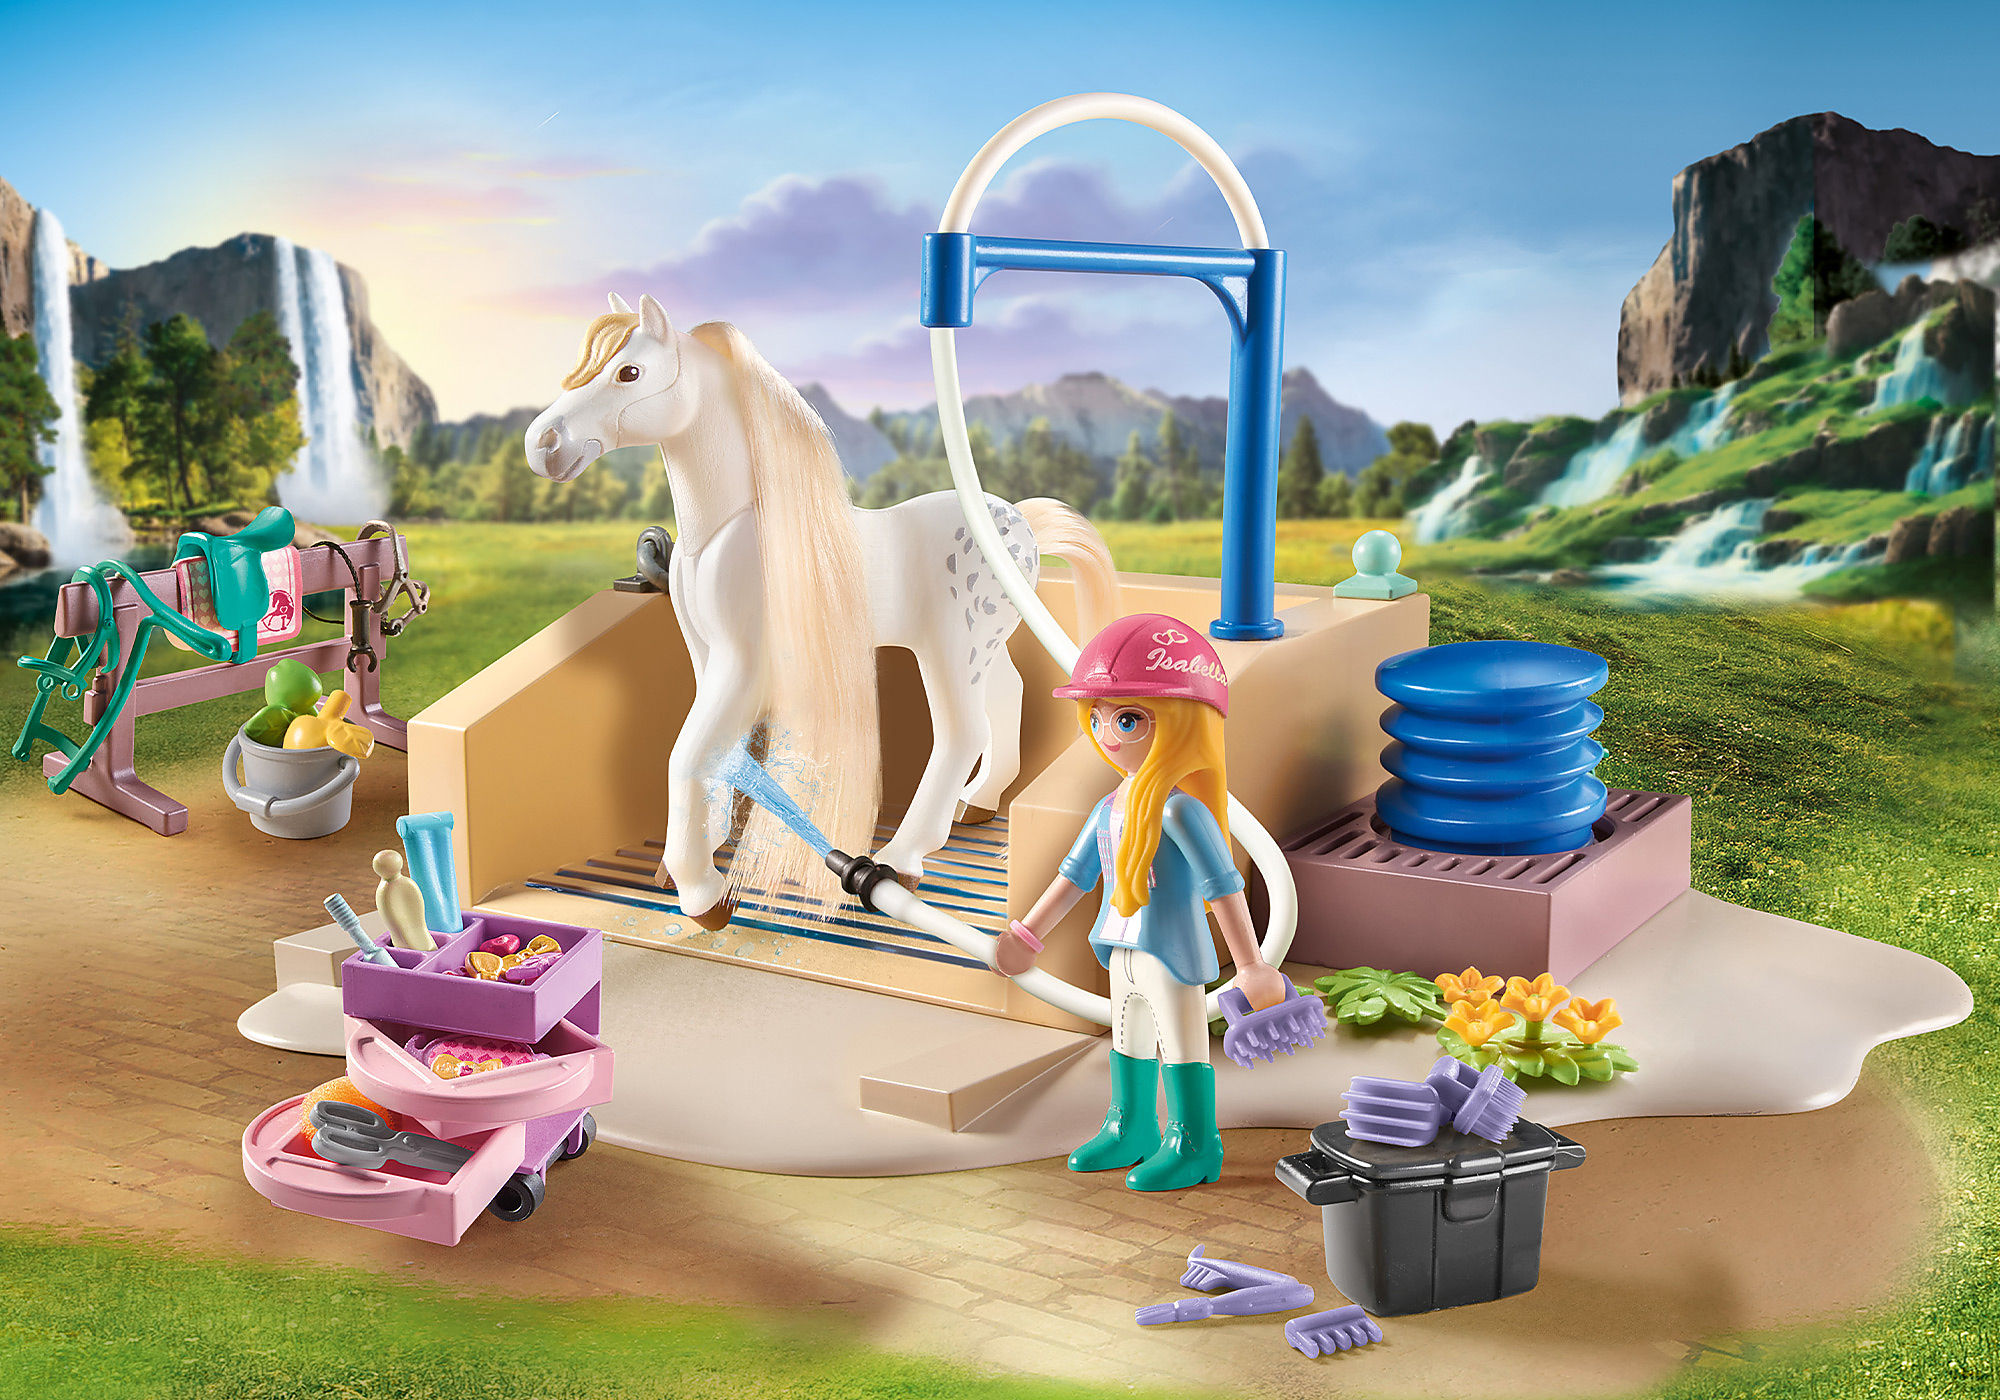 Space Toys for Kids from Playmobil - Long Wait For Isabella